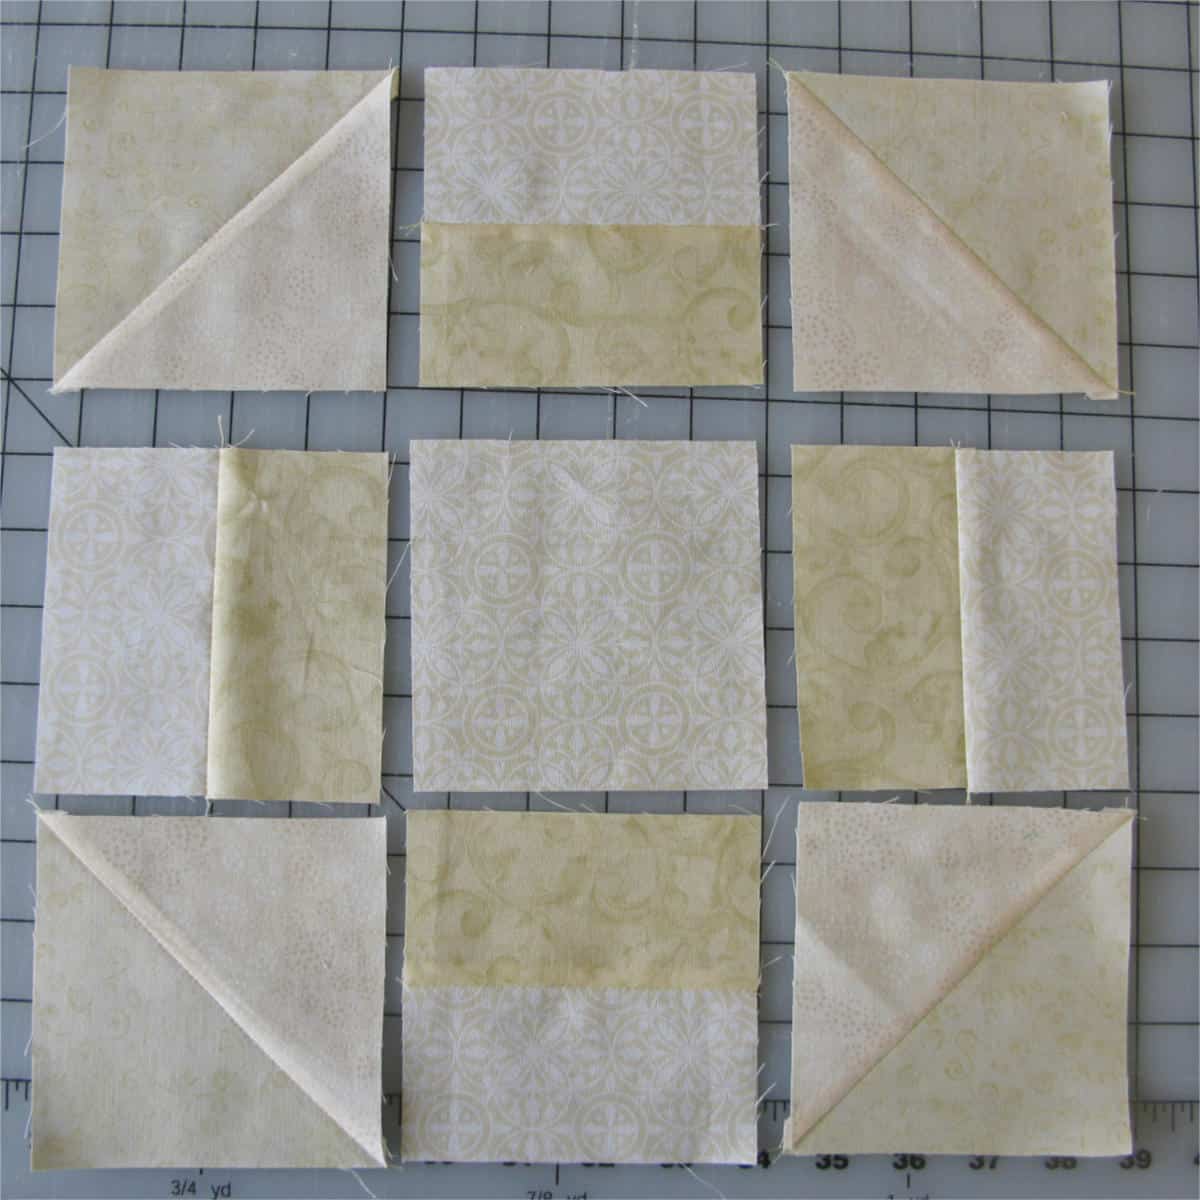 sew sections together of block